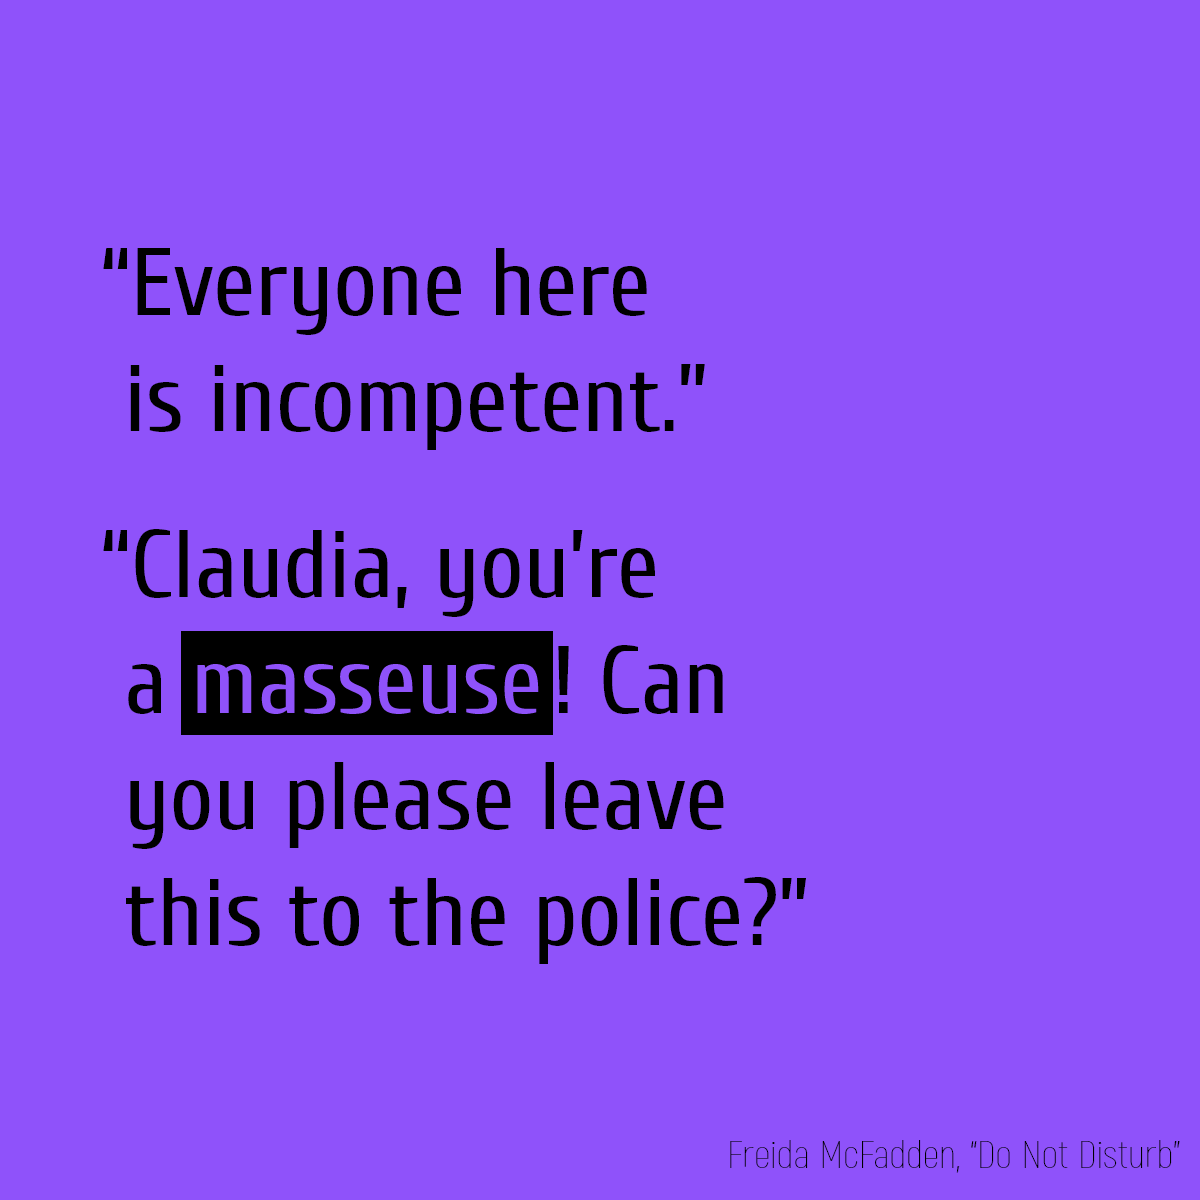 “Everyone here is incompetent.” “Claudia, you’re a **masseuse**! Can you please leave this to the police?”